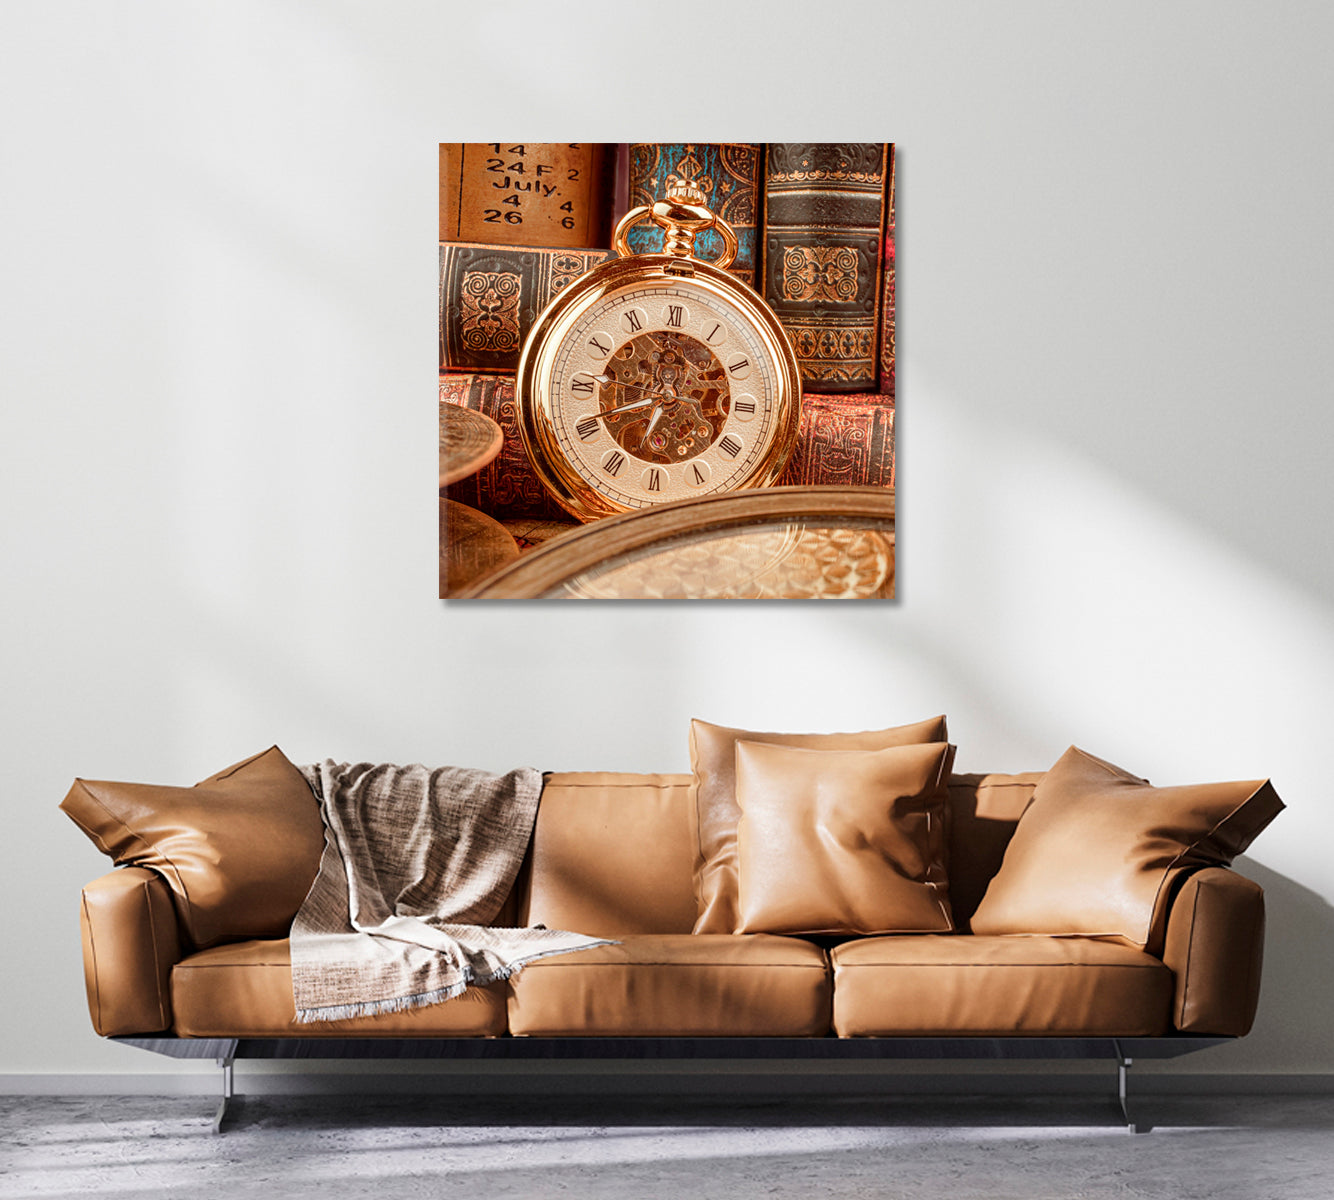 Vintage Pocket Watch and Old Books Canvas Print ArtLexy 1 Panel 12"x12" inches 